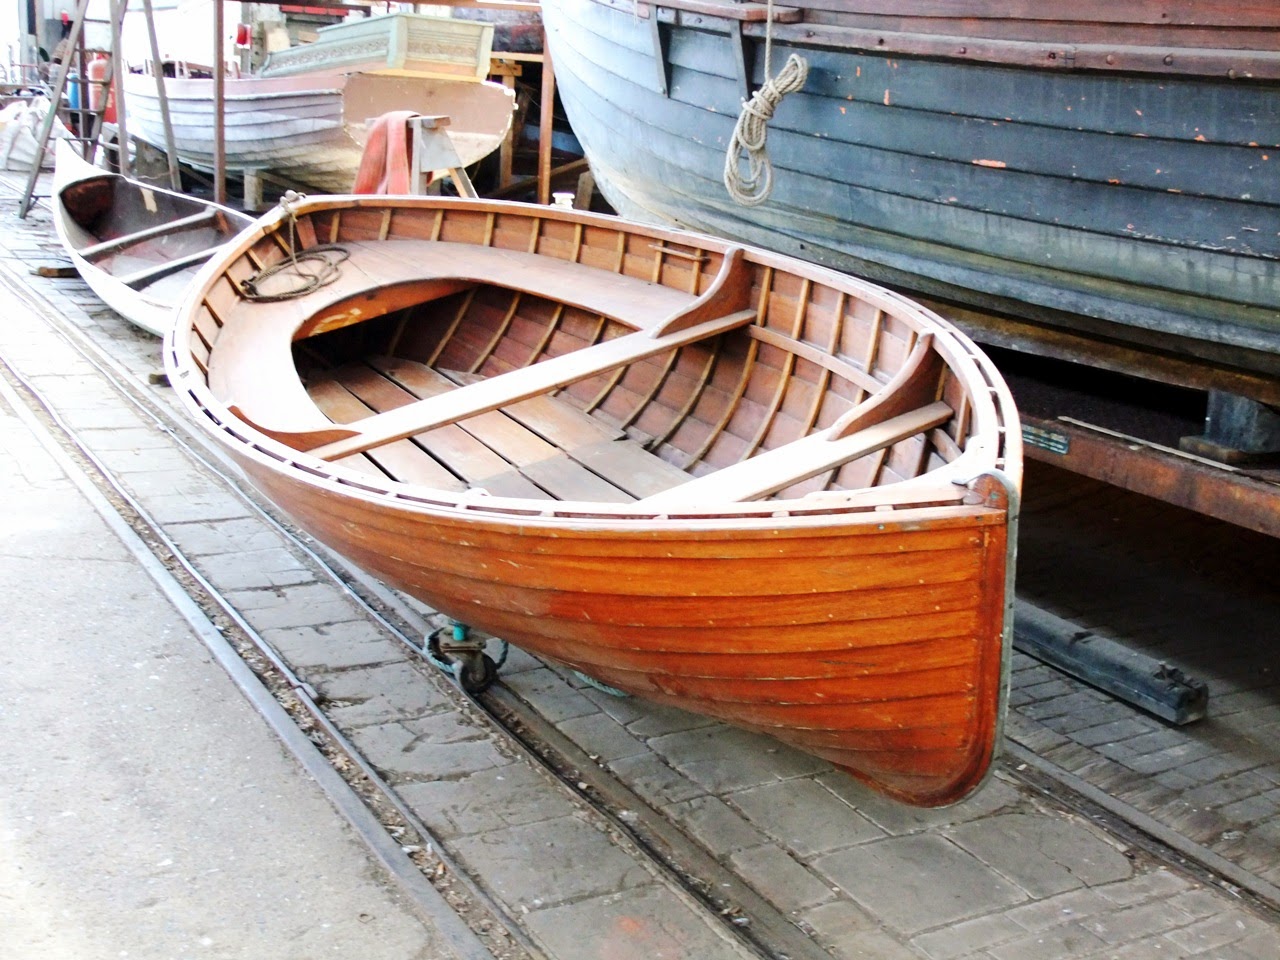 A small wooden boat is called